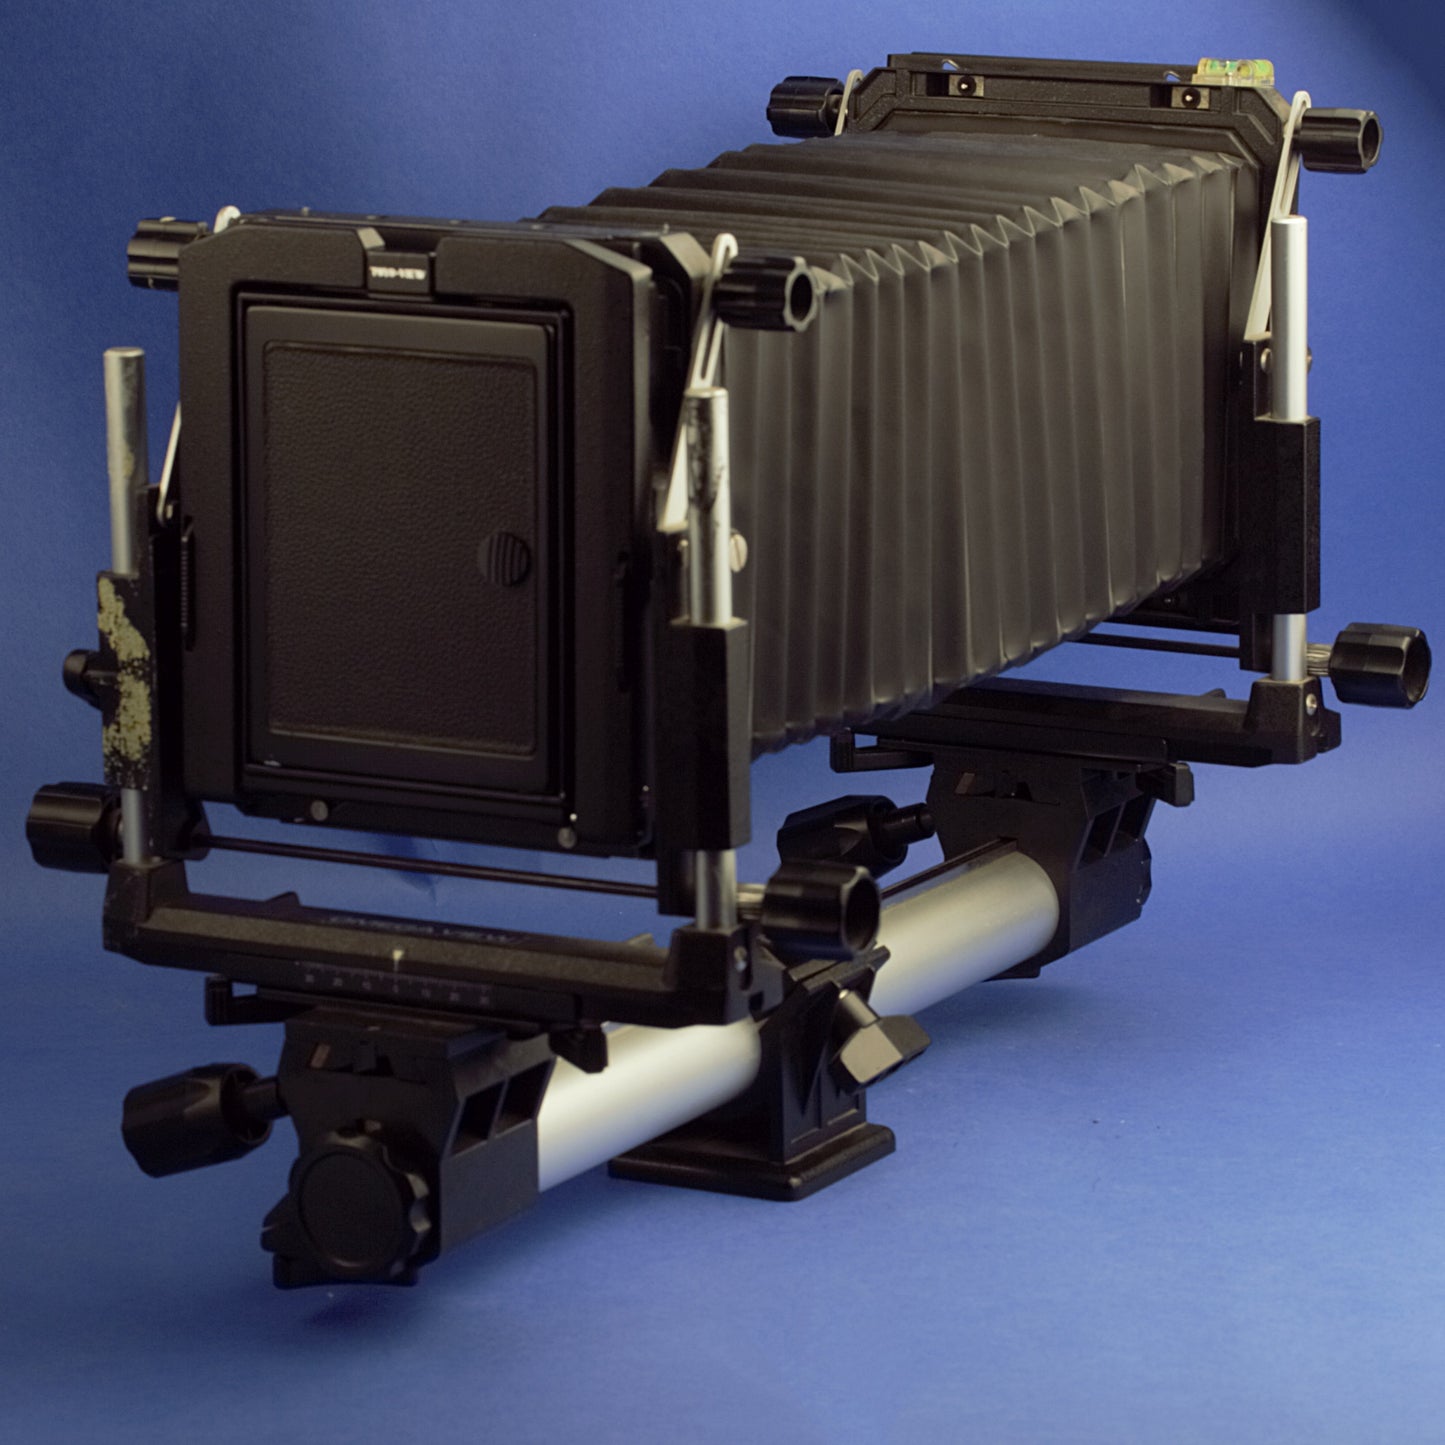 Omega View 45F 4x5 Large Format Camera